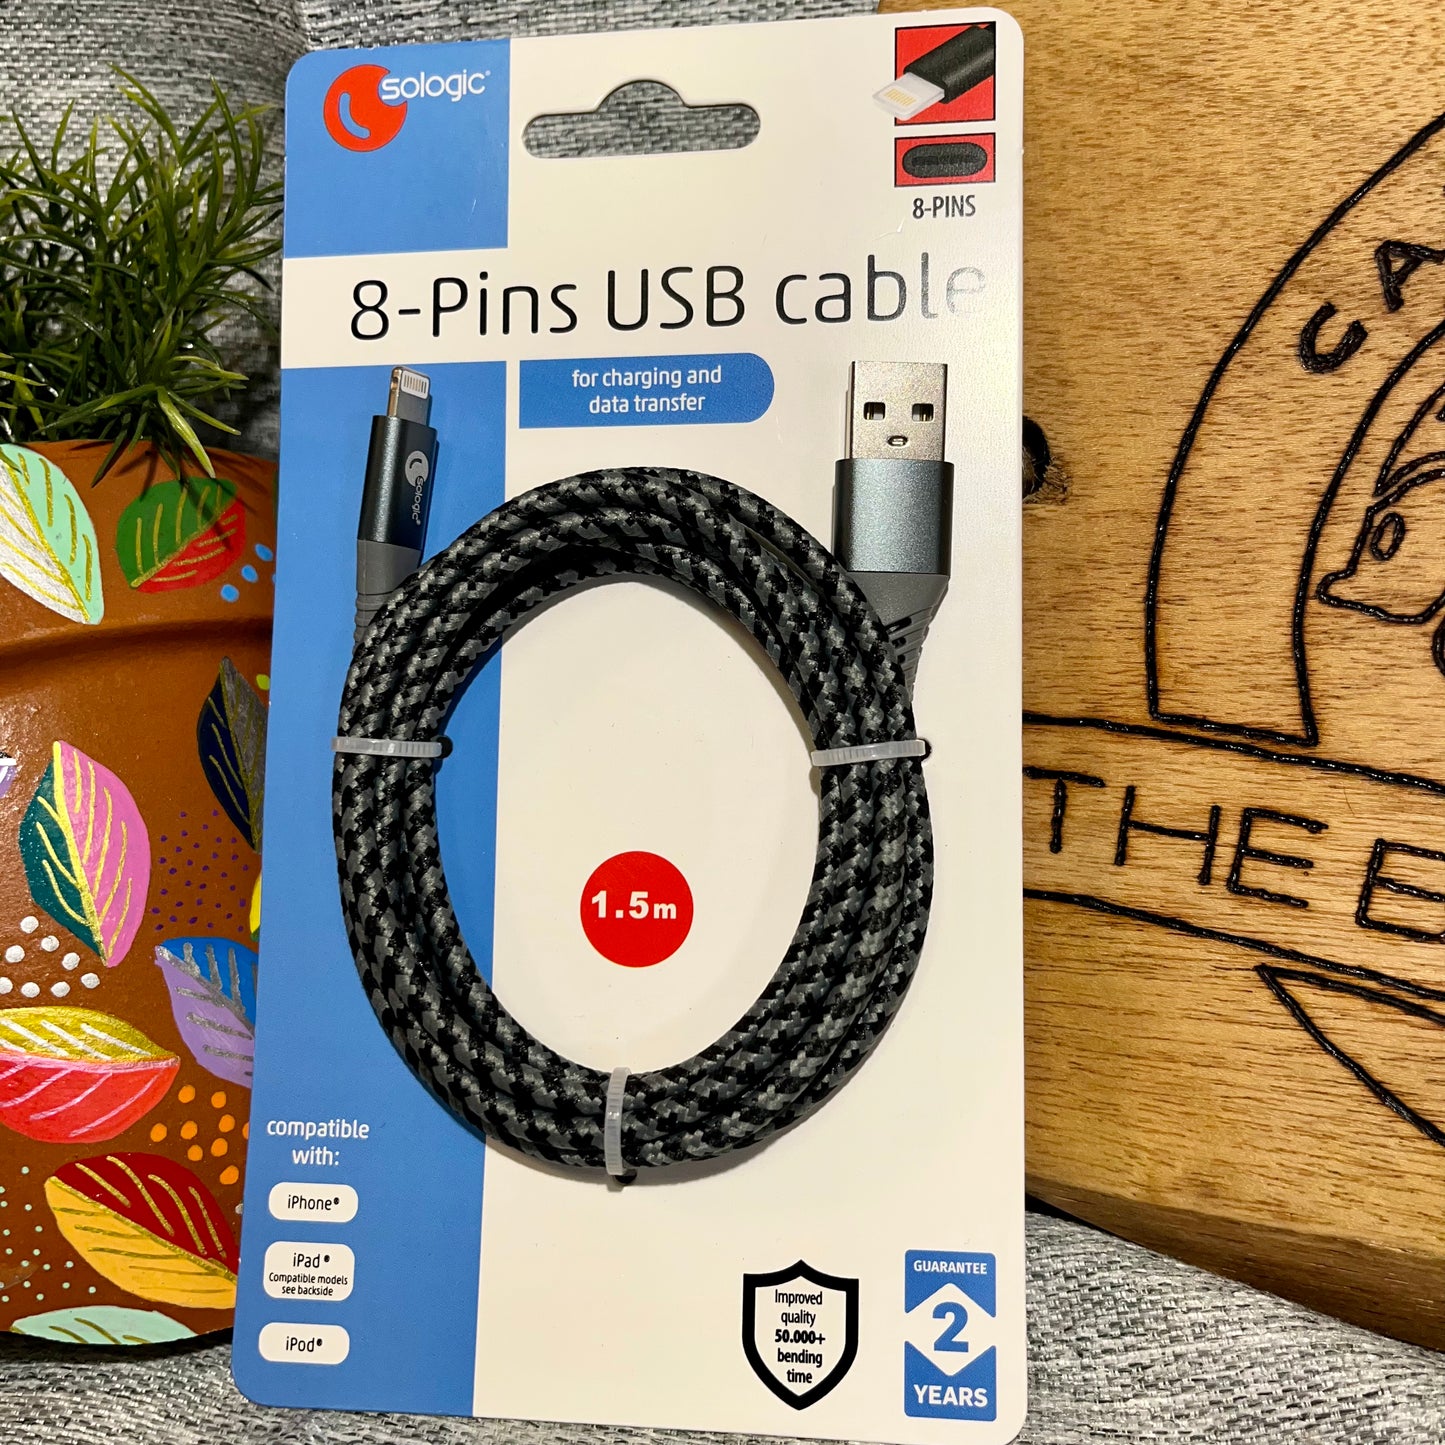 8-Pins USB cable